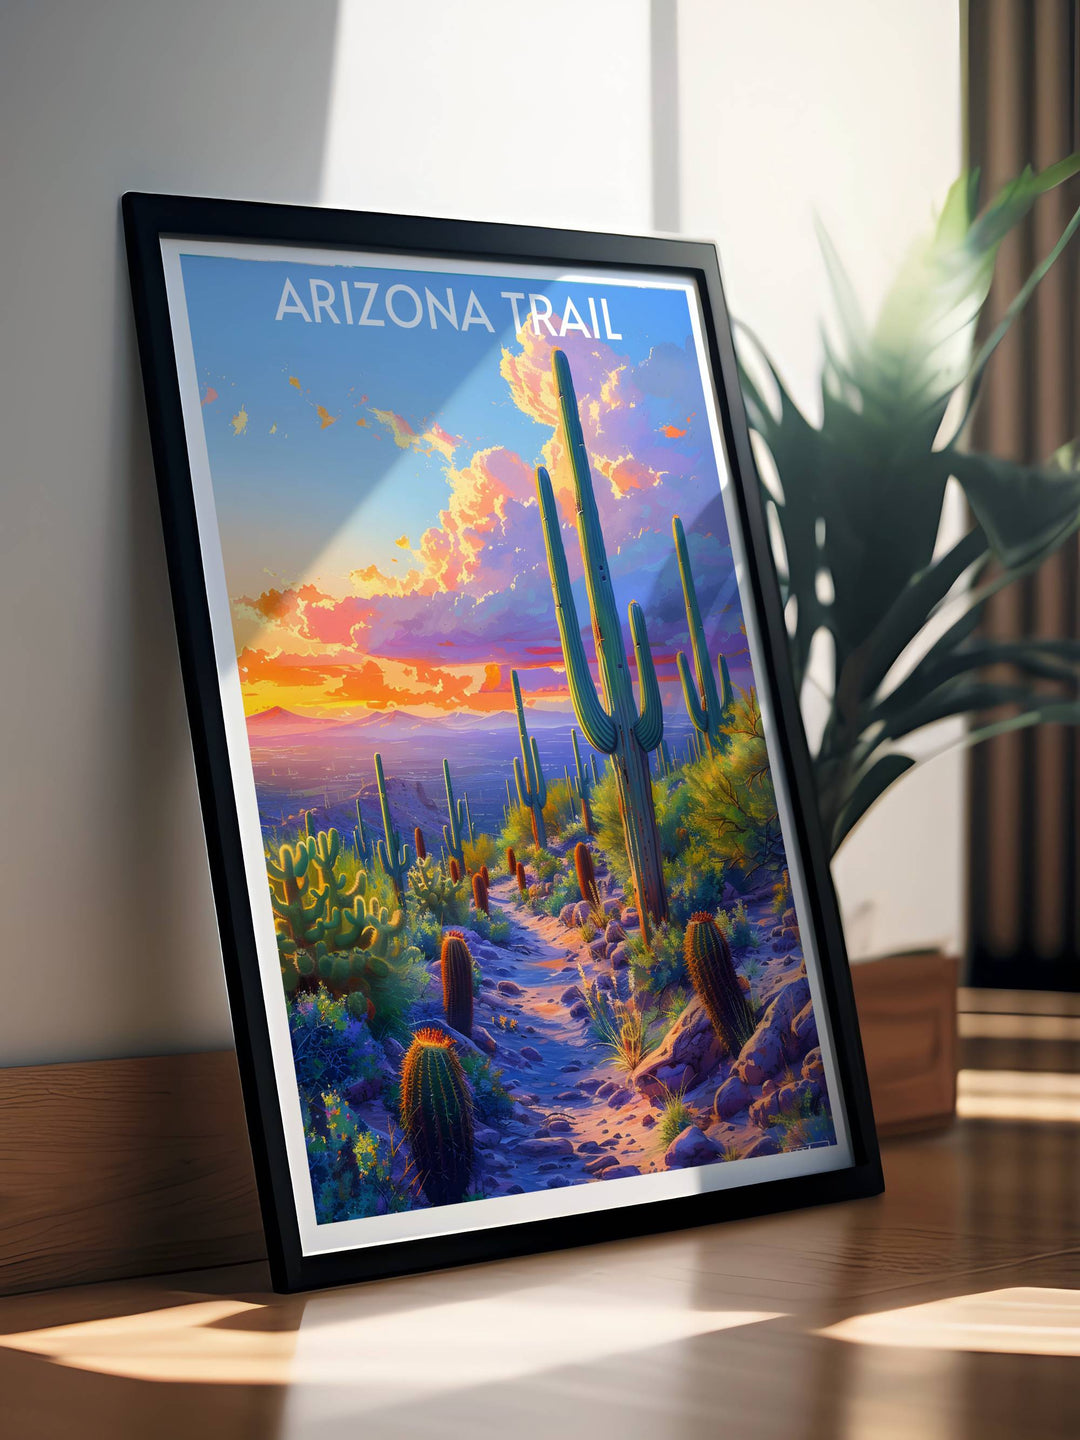 Pacific Crest Trail and Saguaro National Park prints perfect for those who dream of adventure and exploration these art pieces capture the essence of Americas most iconic trails and parks ideal for home or office.